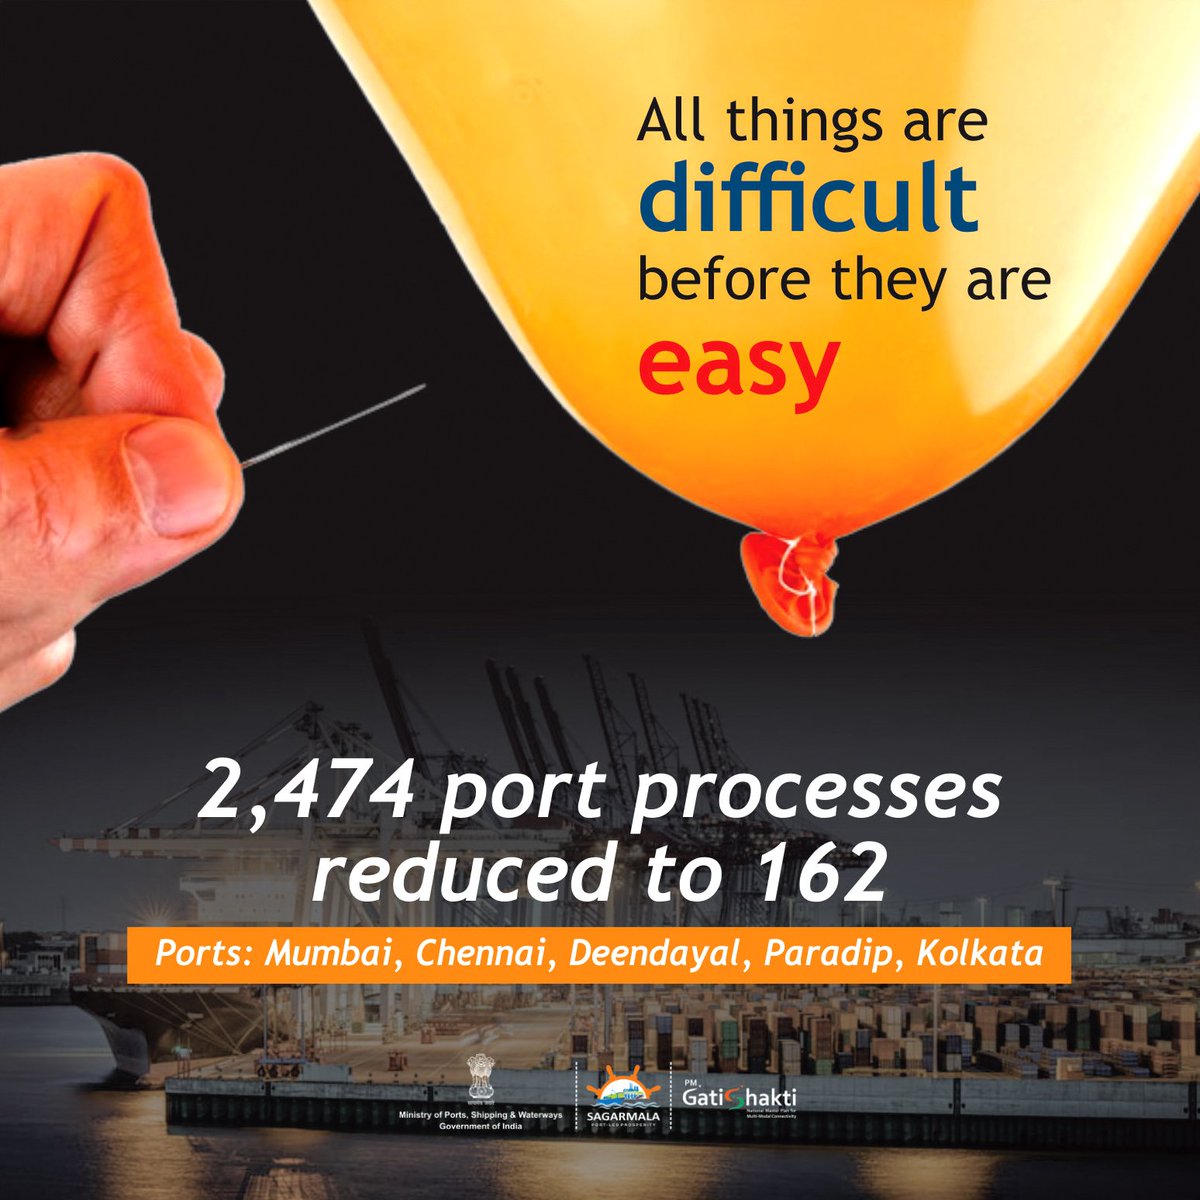 EBS at 5 major ports: @MumbaiPortTrust, @PortofChennai, @Deendayal_Port, @paradipport,& @SMPort_Kolkata where a total number of 2474 processes were rationalised, harmonised, optimised and standardised to arrive at a final re-engineered process count of 162. @Indportsassn